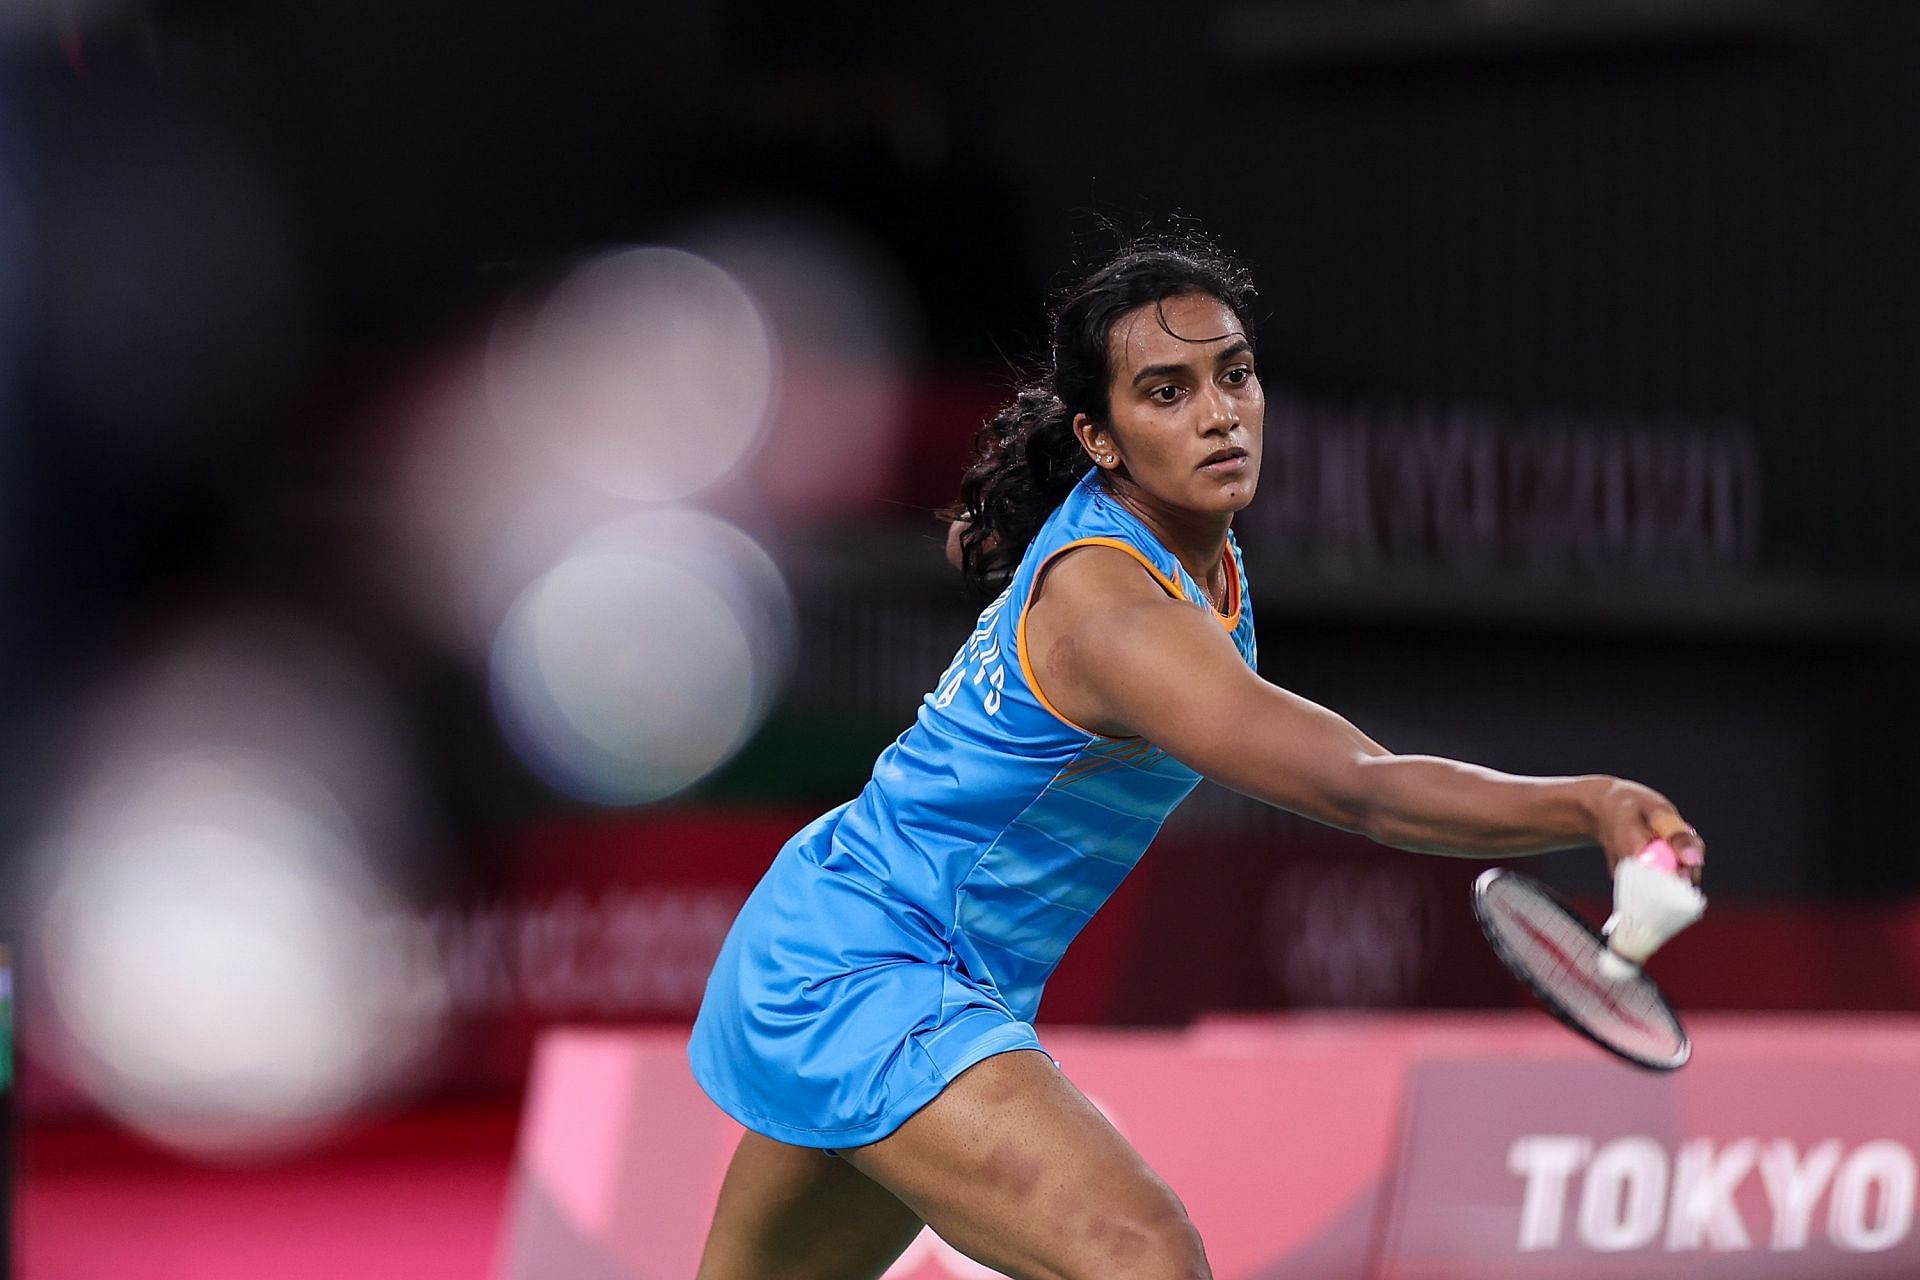 All England Open 2022, PV Sindhu vs Wang Zhi Yi Where to watch, TV schedule, live stream details and more